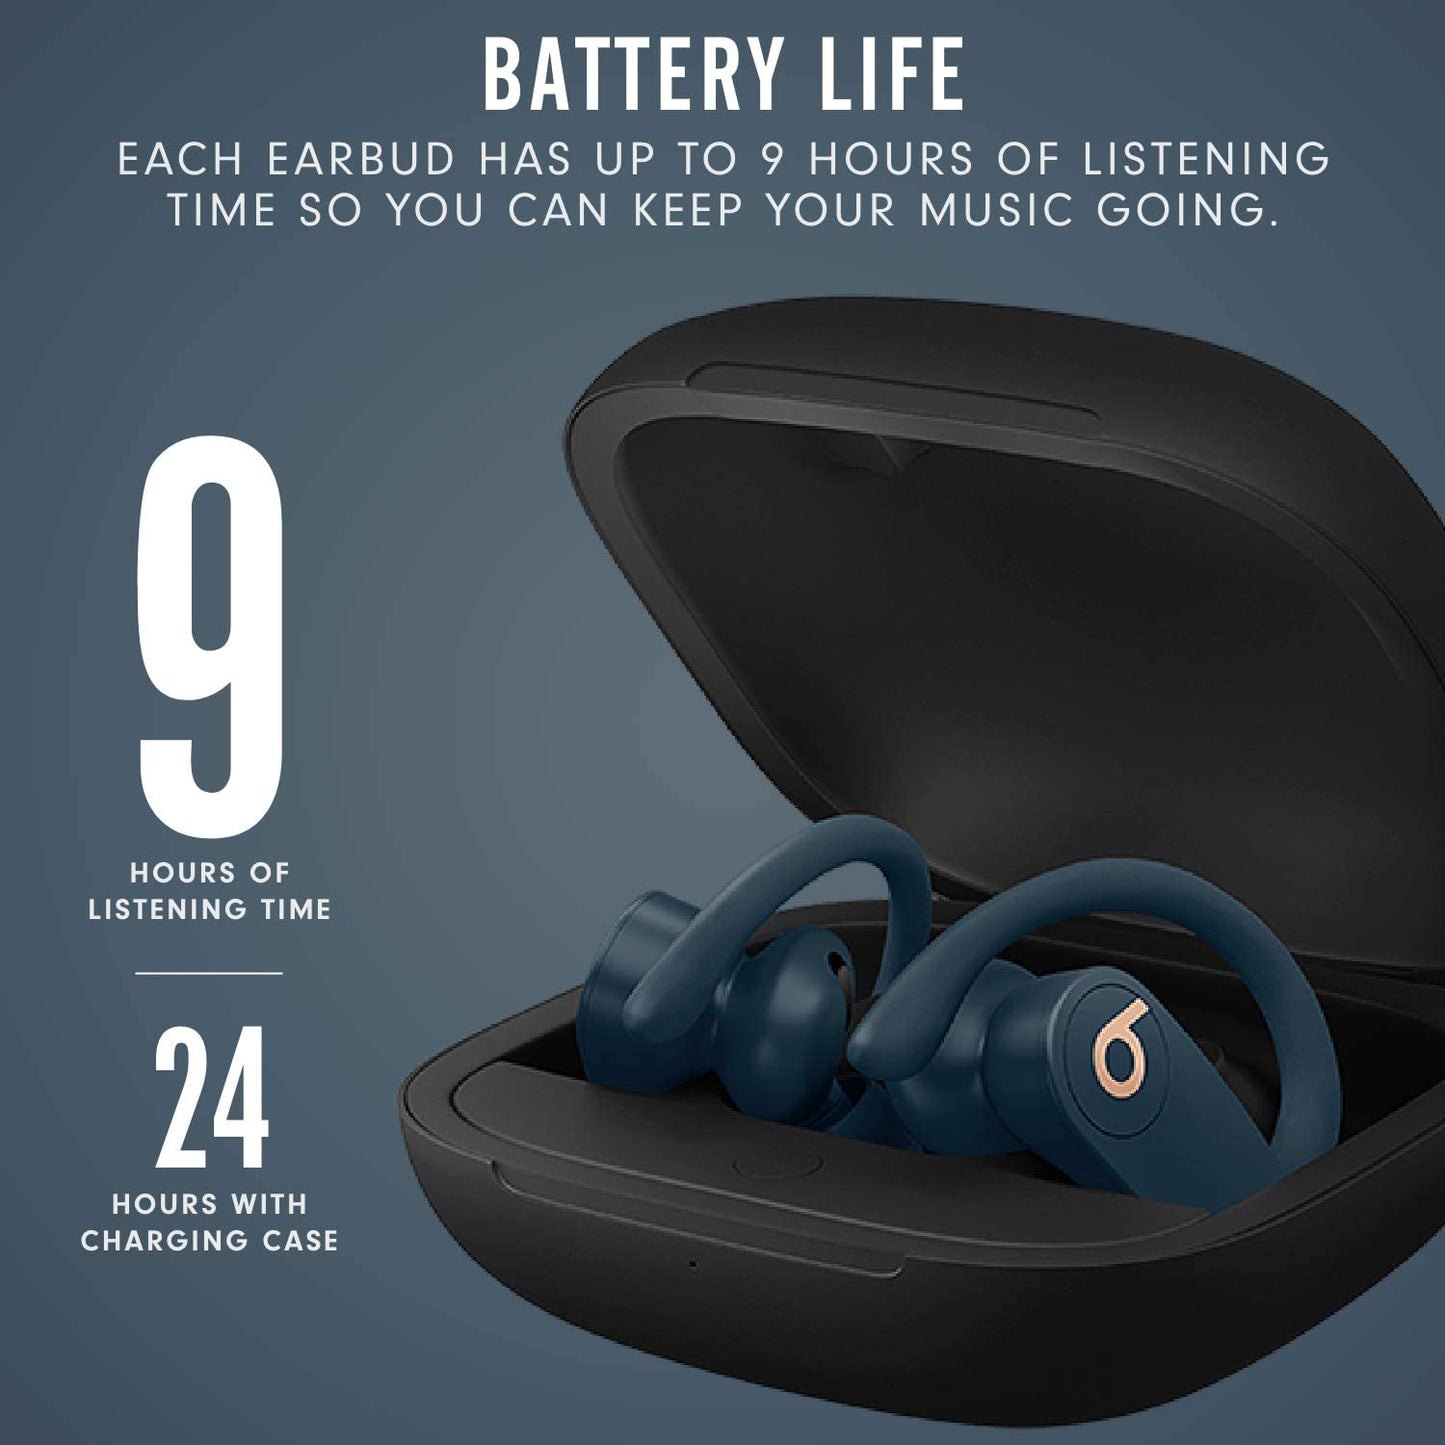 Power Pro Wireless Earbuds - Apple H1 Headphone Chip, Class 1 Bluetooth Headphones, 9 Hours of Listening Time, Sweat Resistant, Built-In Microphone - Navy